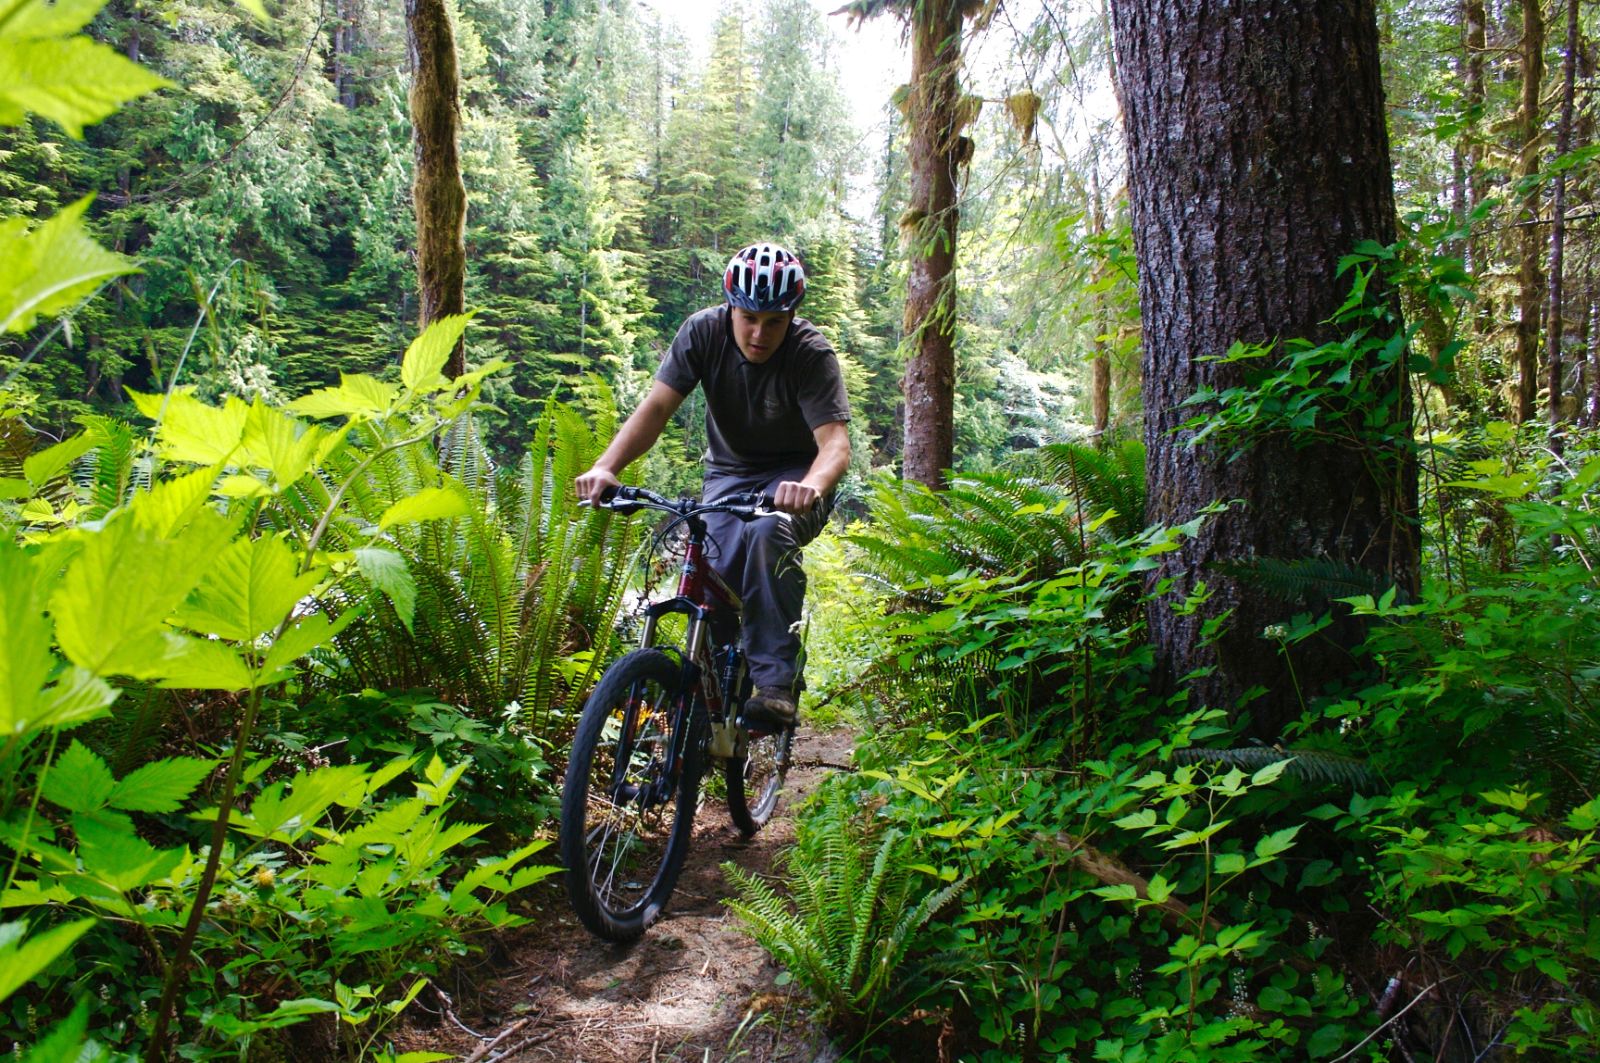 Biking through the forests of Clayoquot on Vancouver Island